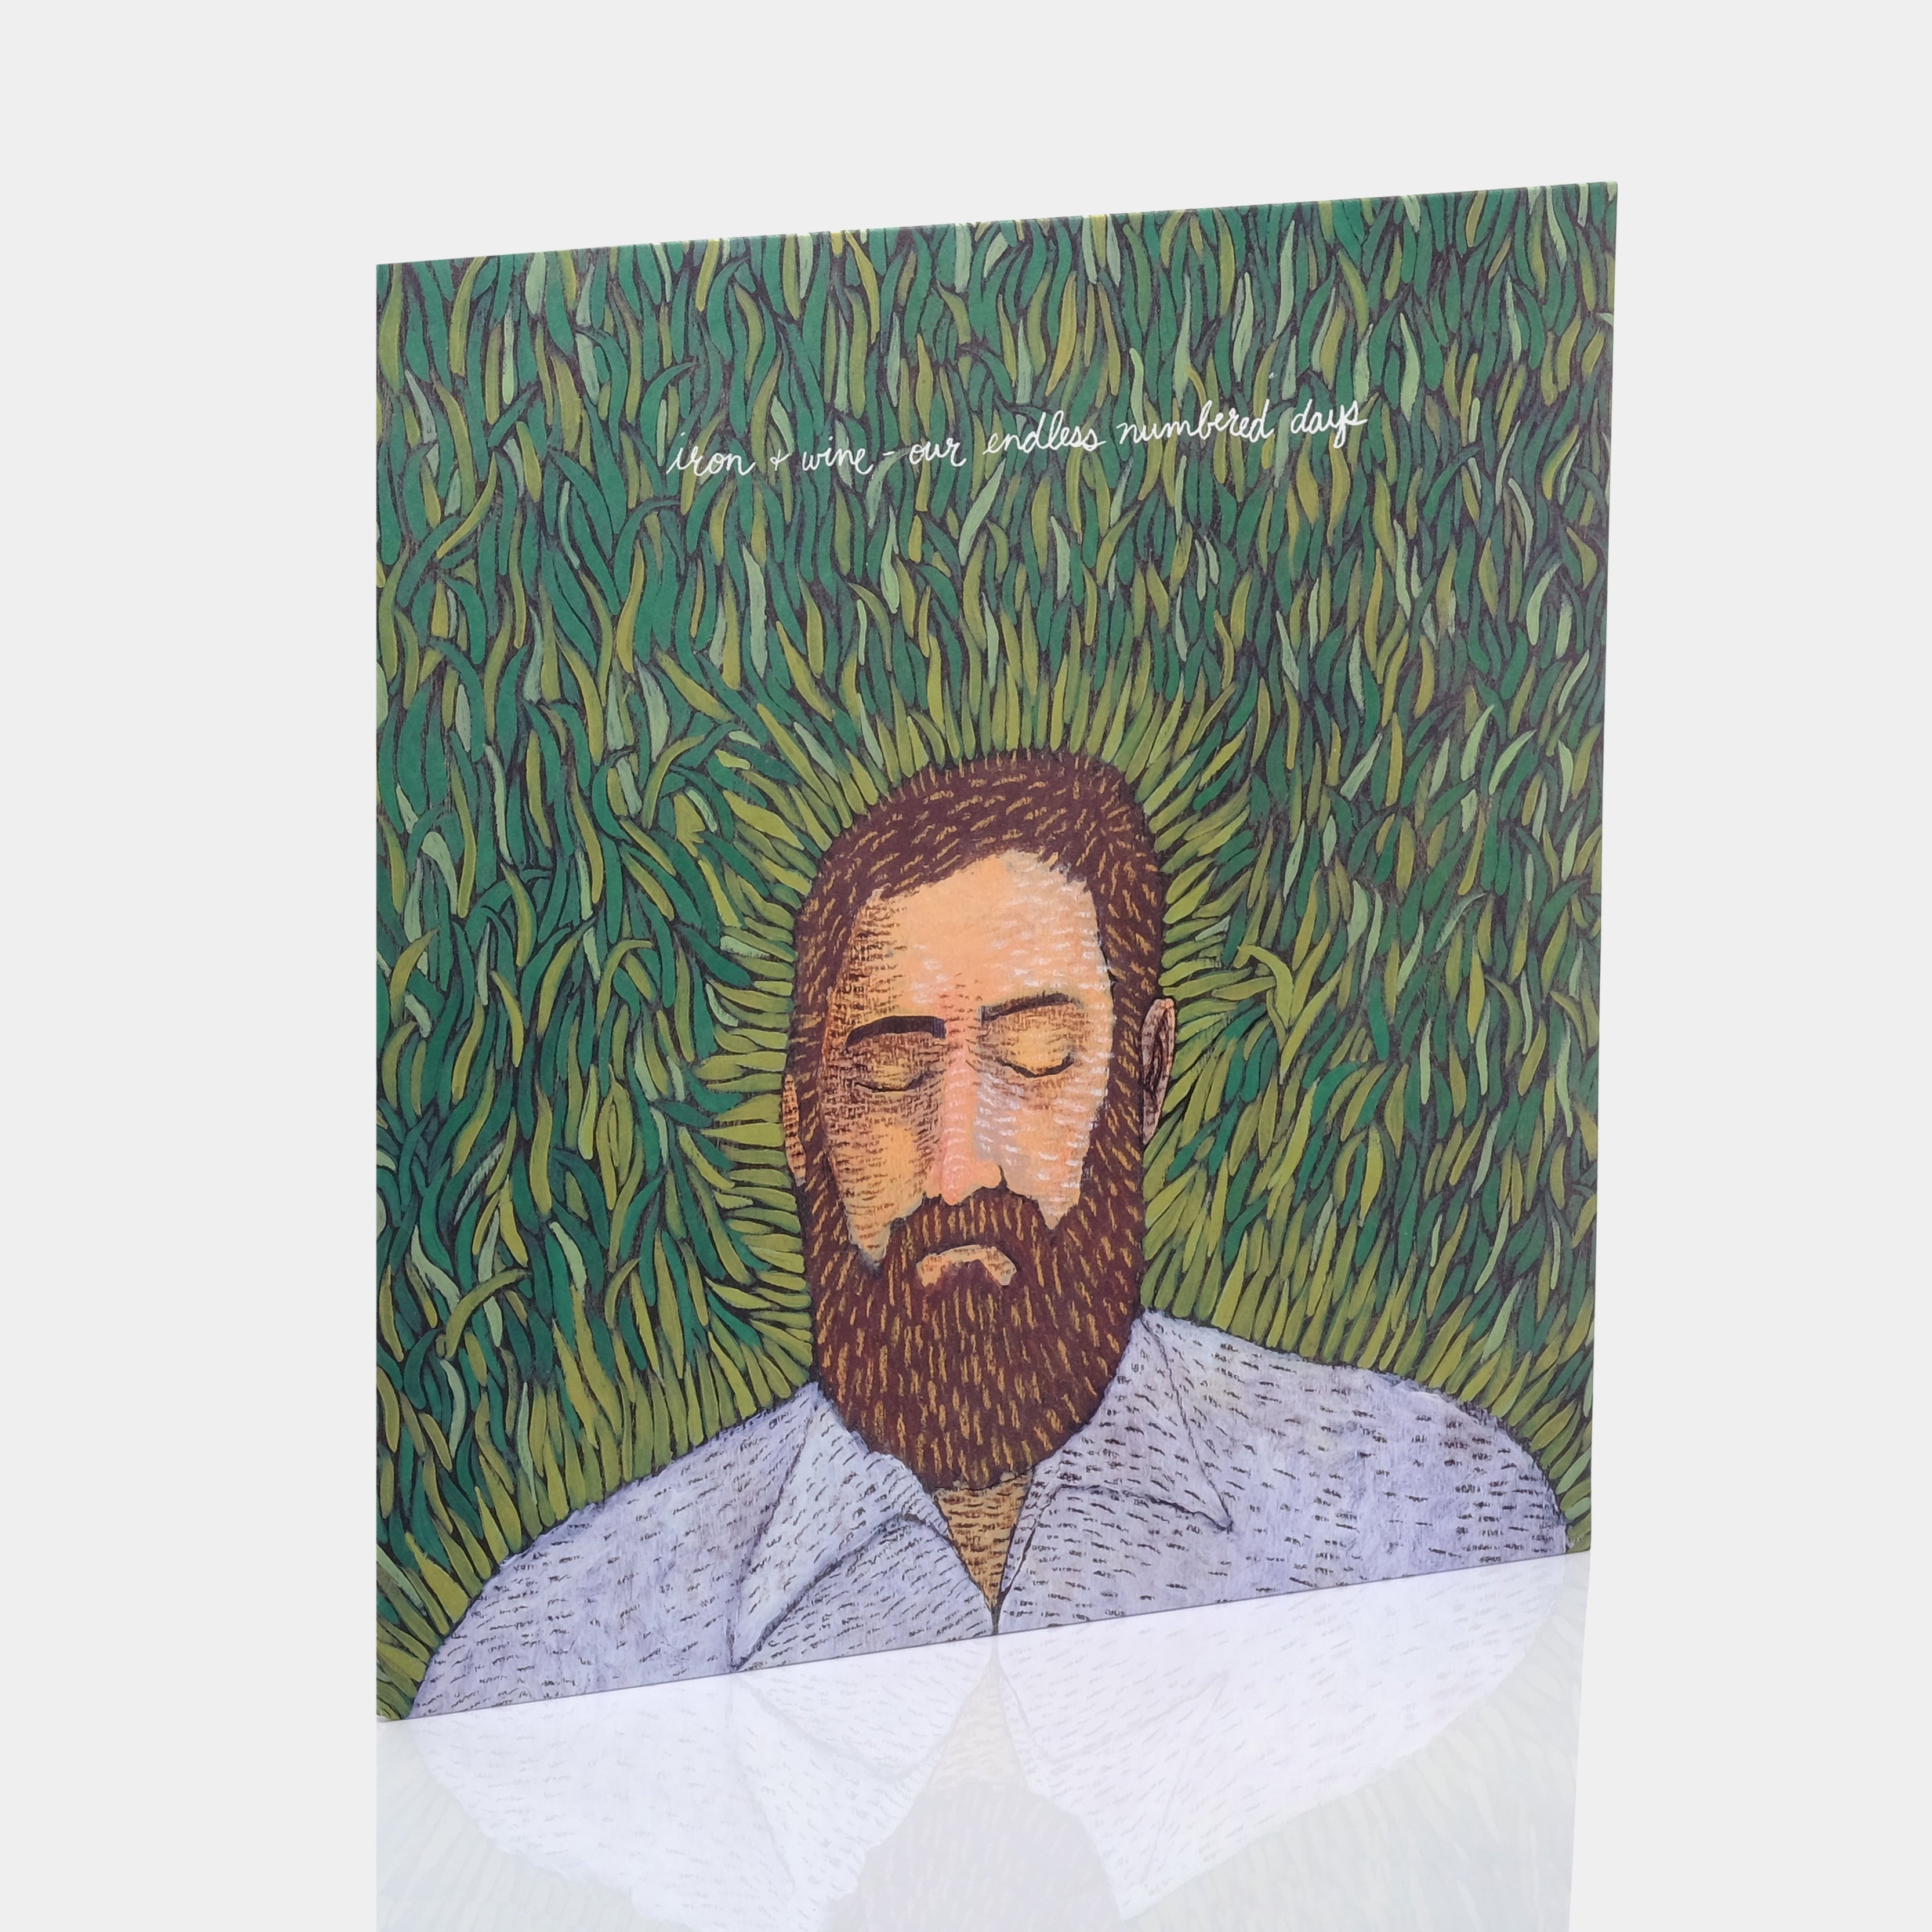 Iron & Wine - Our Endless Numbered Days LP Vinyl Record